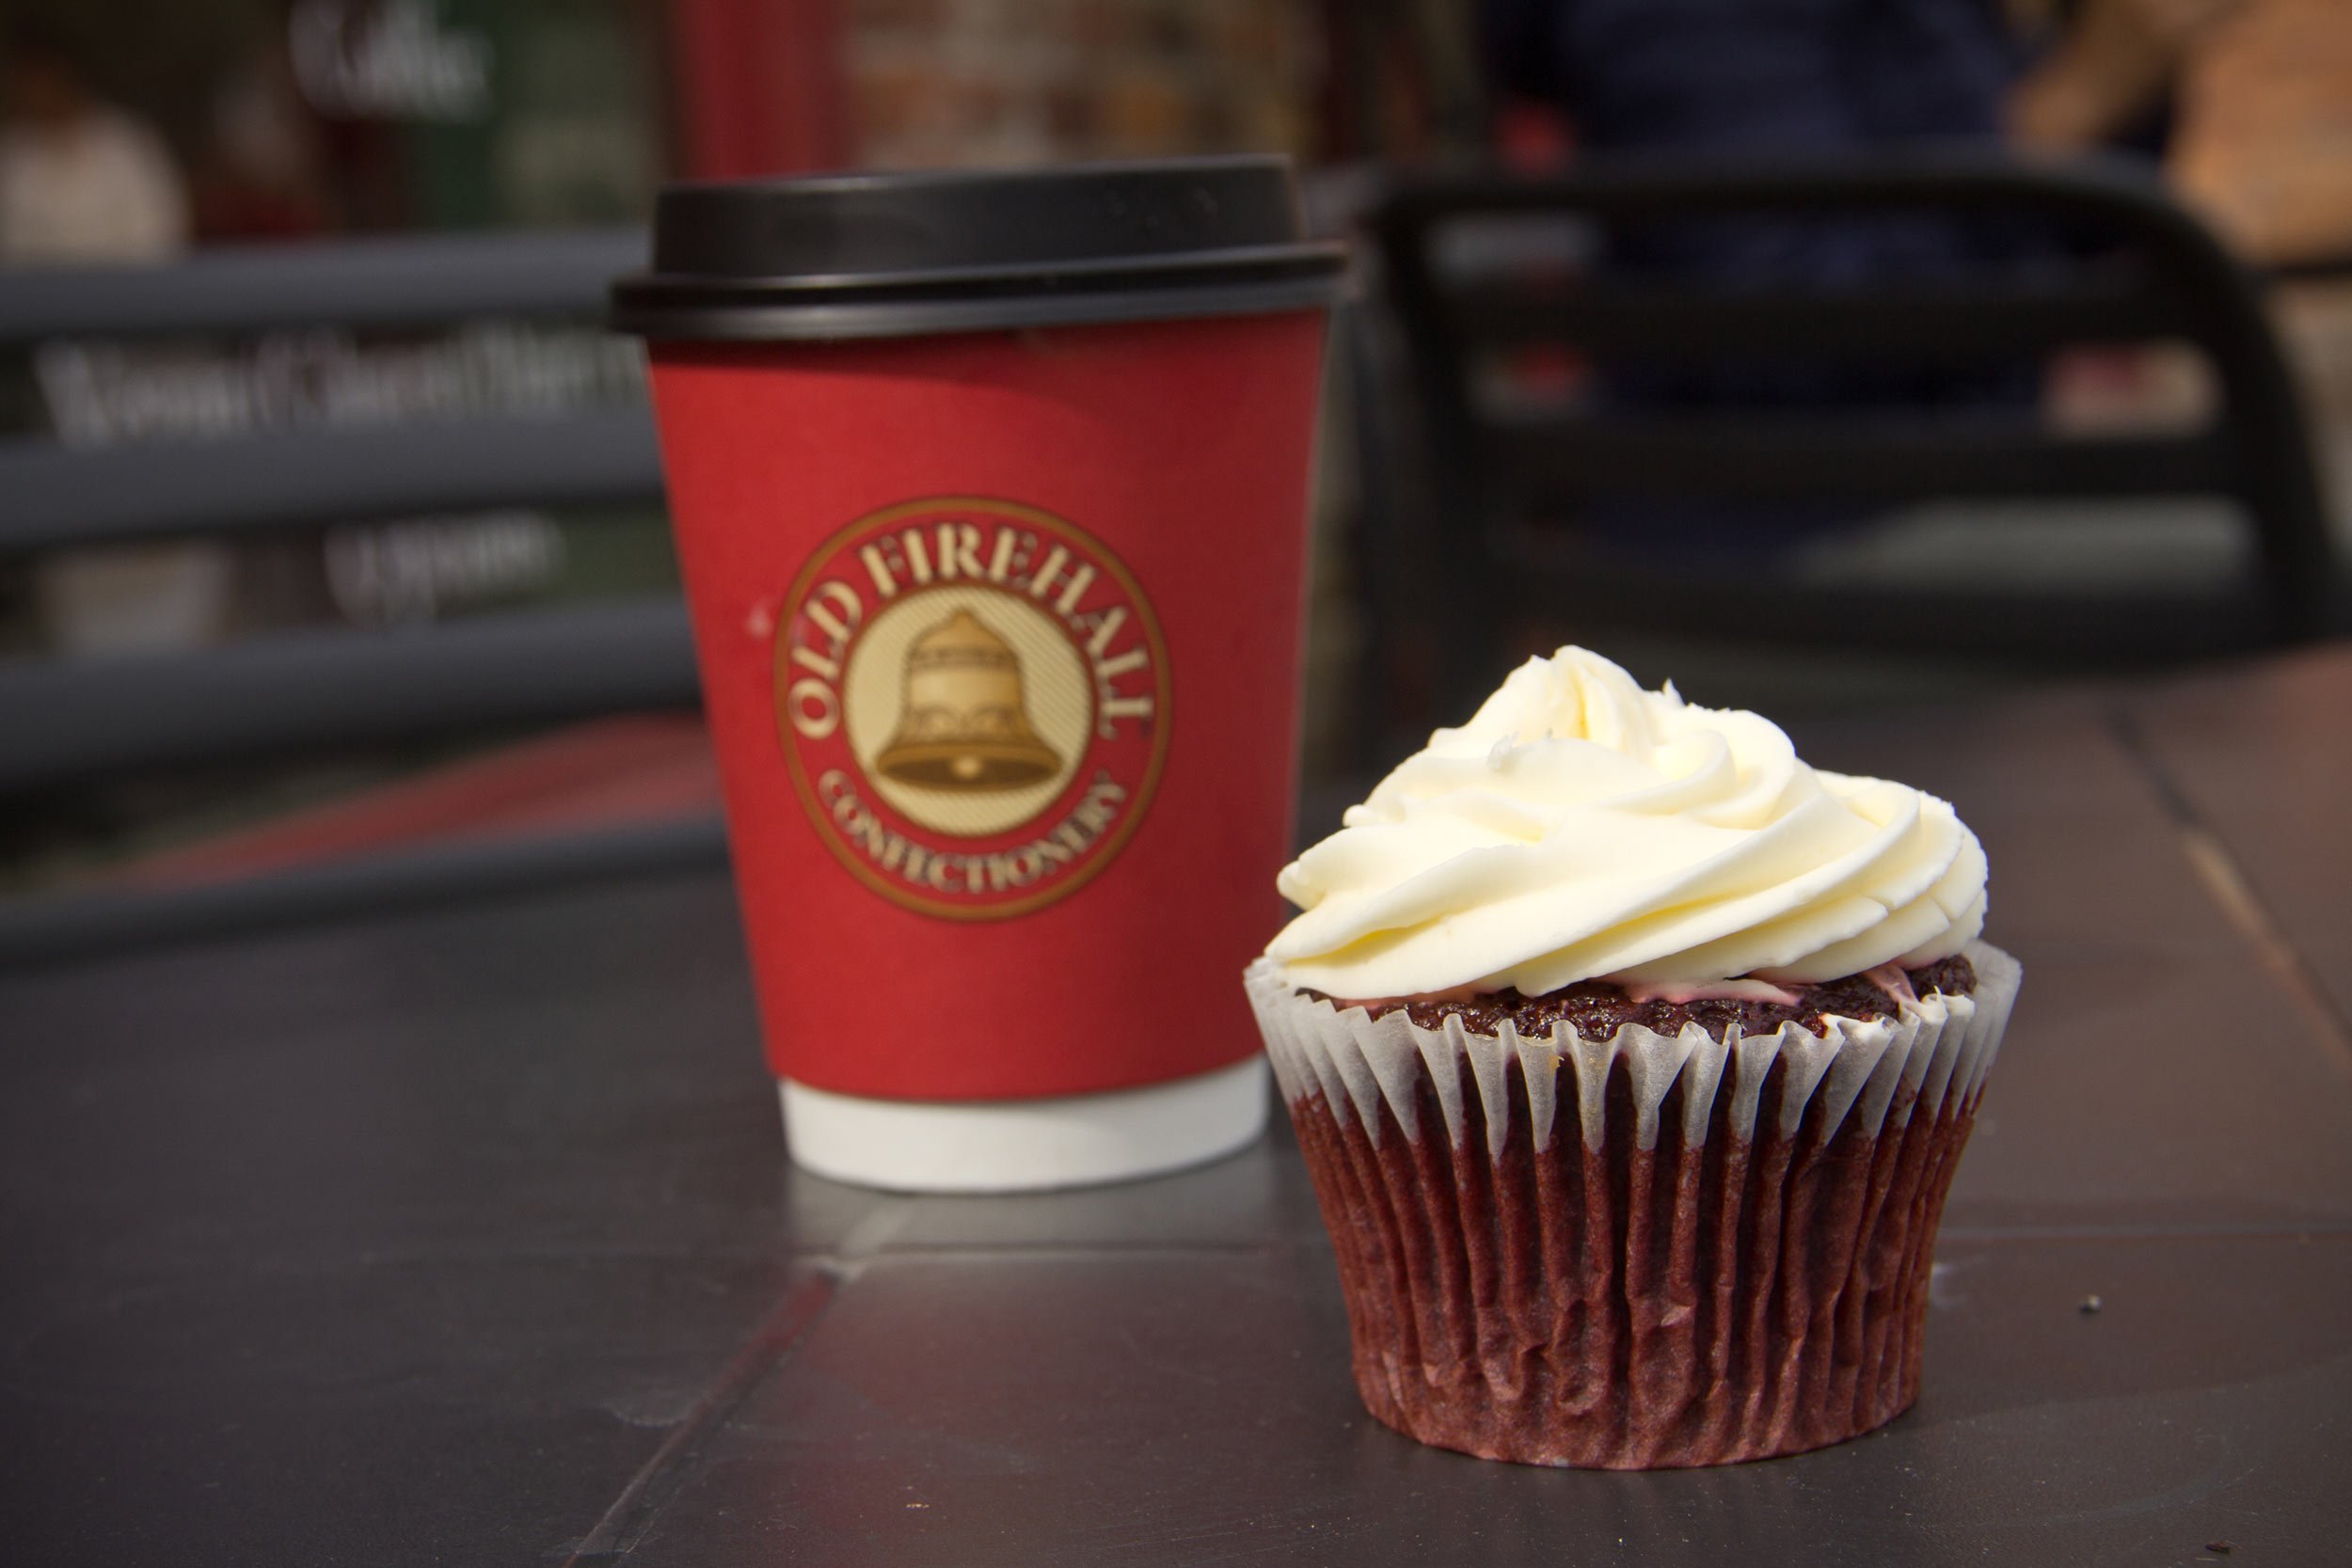 red-velvet-cupcake-and-hot-chocolate-from-old-firehall-confectionary-main-street-unionville-ontario